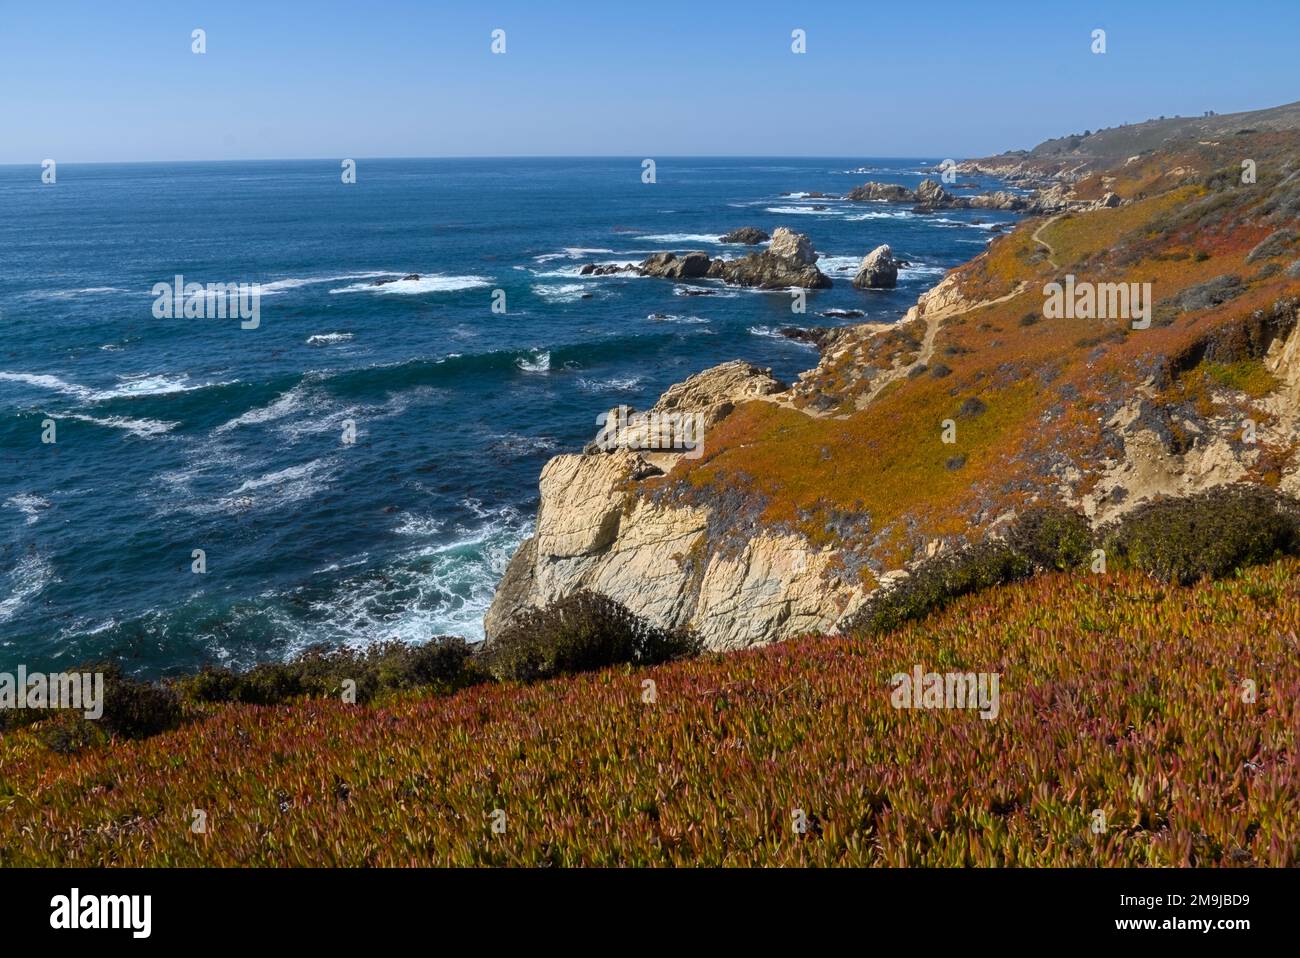 Coast cliff covered with reddish color plants with a curve hiking trial. There're also rocks in the blue sea water. Stock Photo